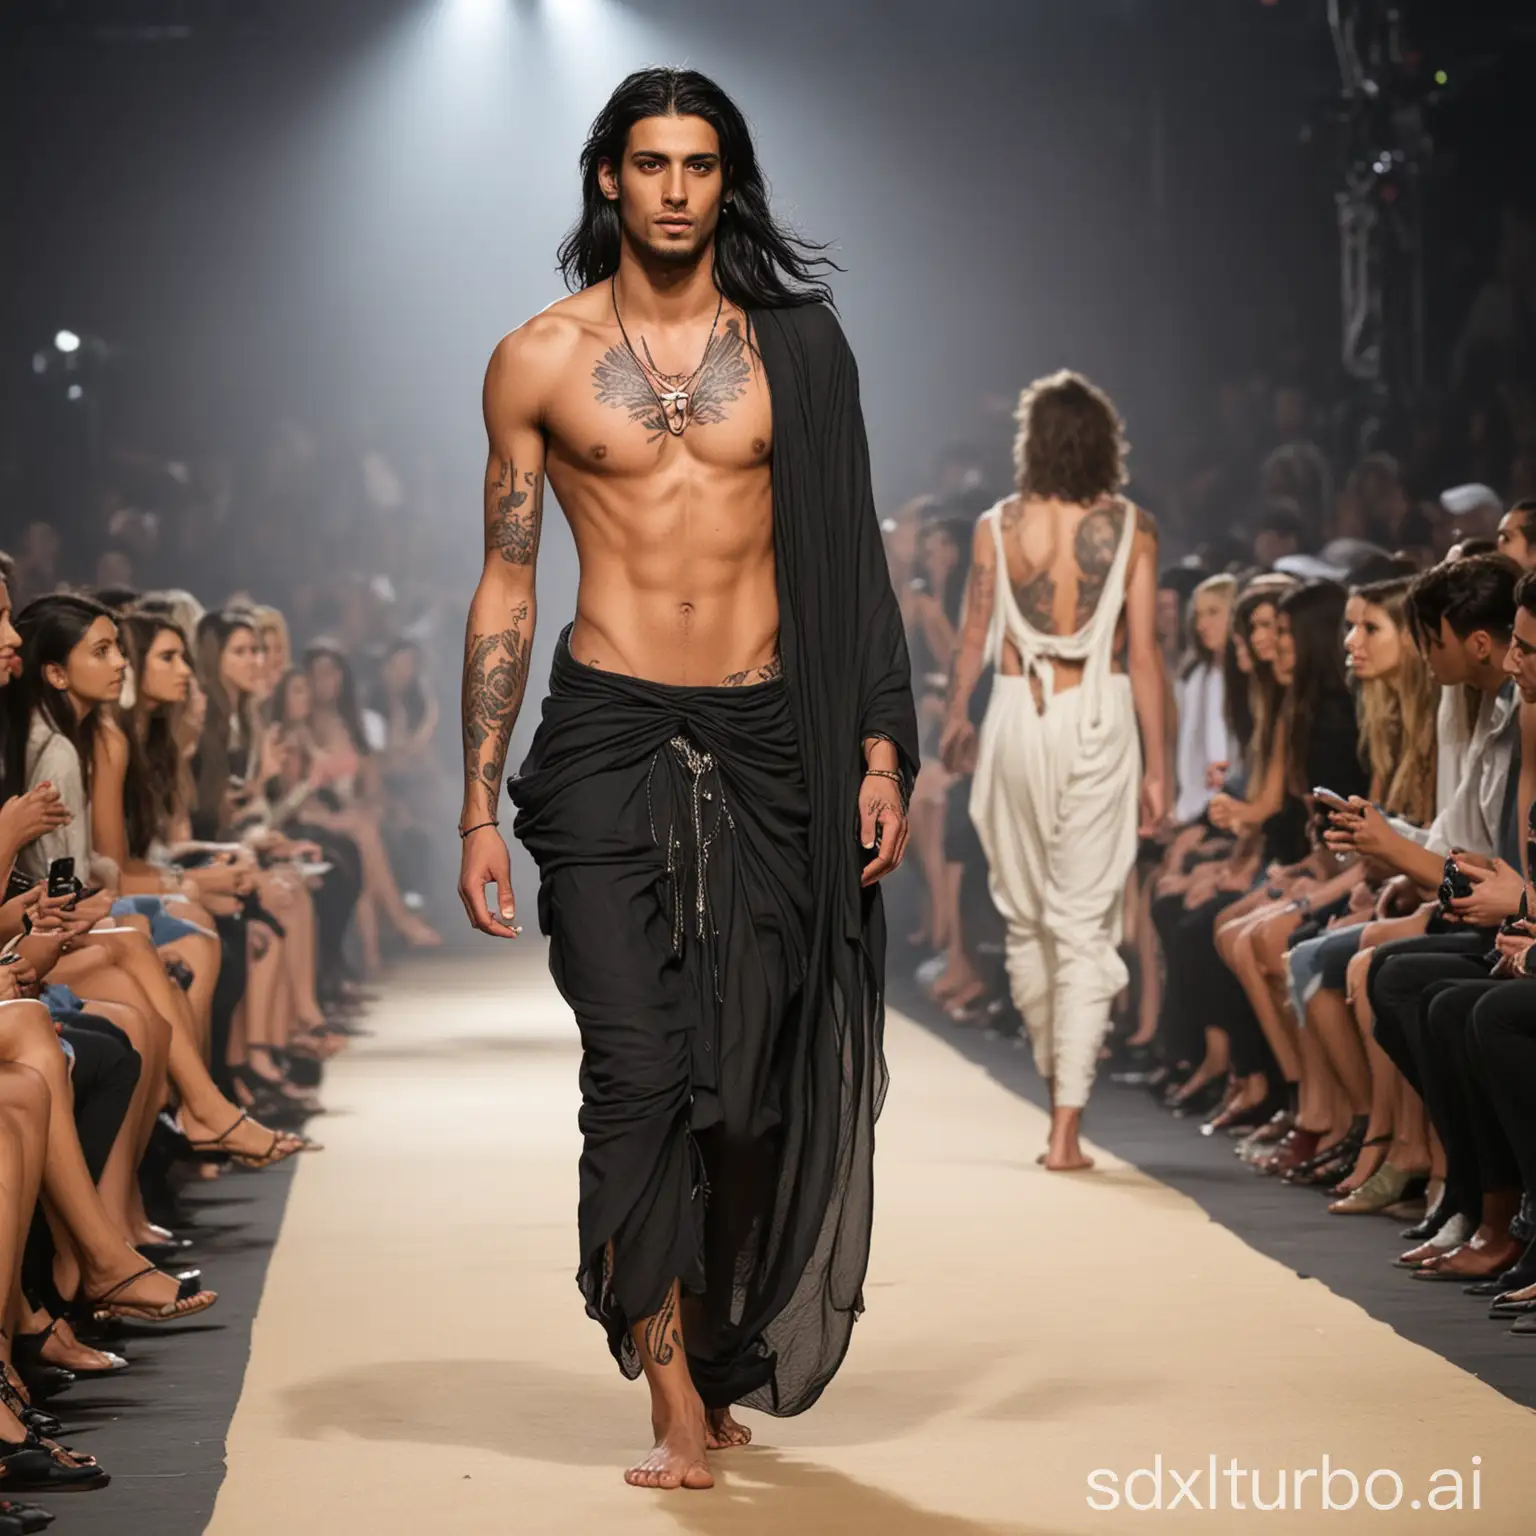 Arabic-Male-Model-in-Fashion-Show-with-Long-Hair-and-Tattoos